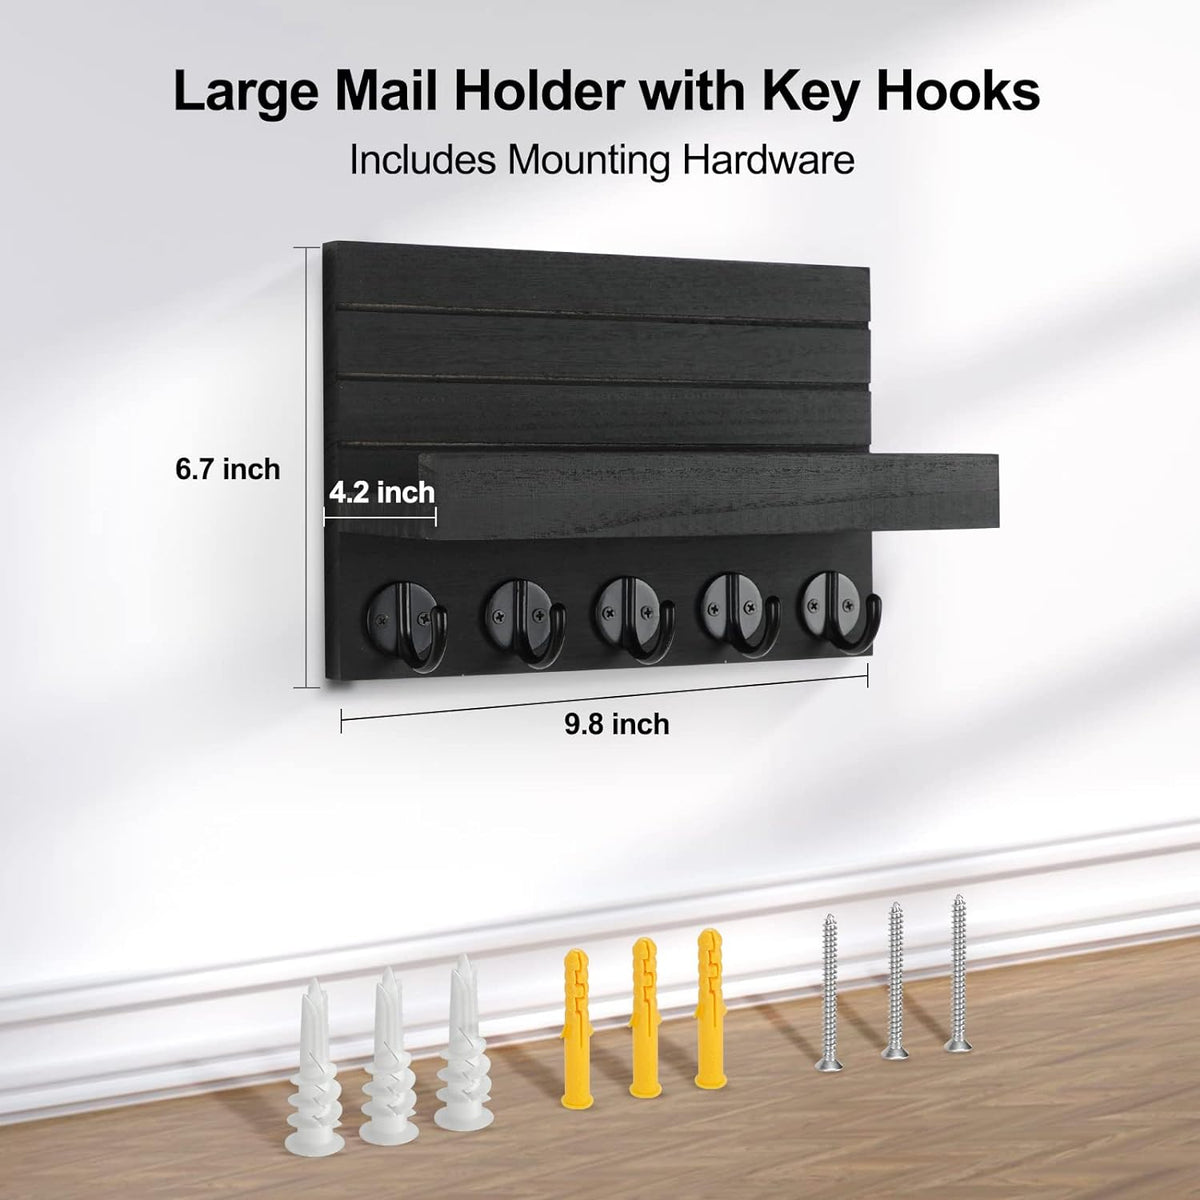 Key Holder for Wall, Decorative Key and Mail Holder with Shelf Has Large Hooks for Bags, Coats, Umbrella – Paulownia Wood Key Hanger with Mounting Hardware (9.8”W x 6.7”H x 4.2”D)